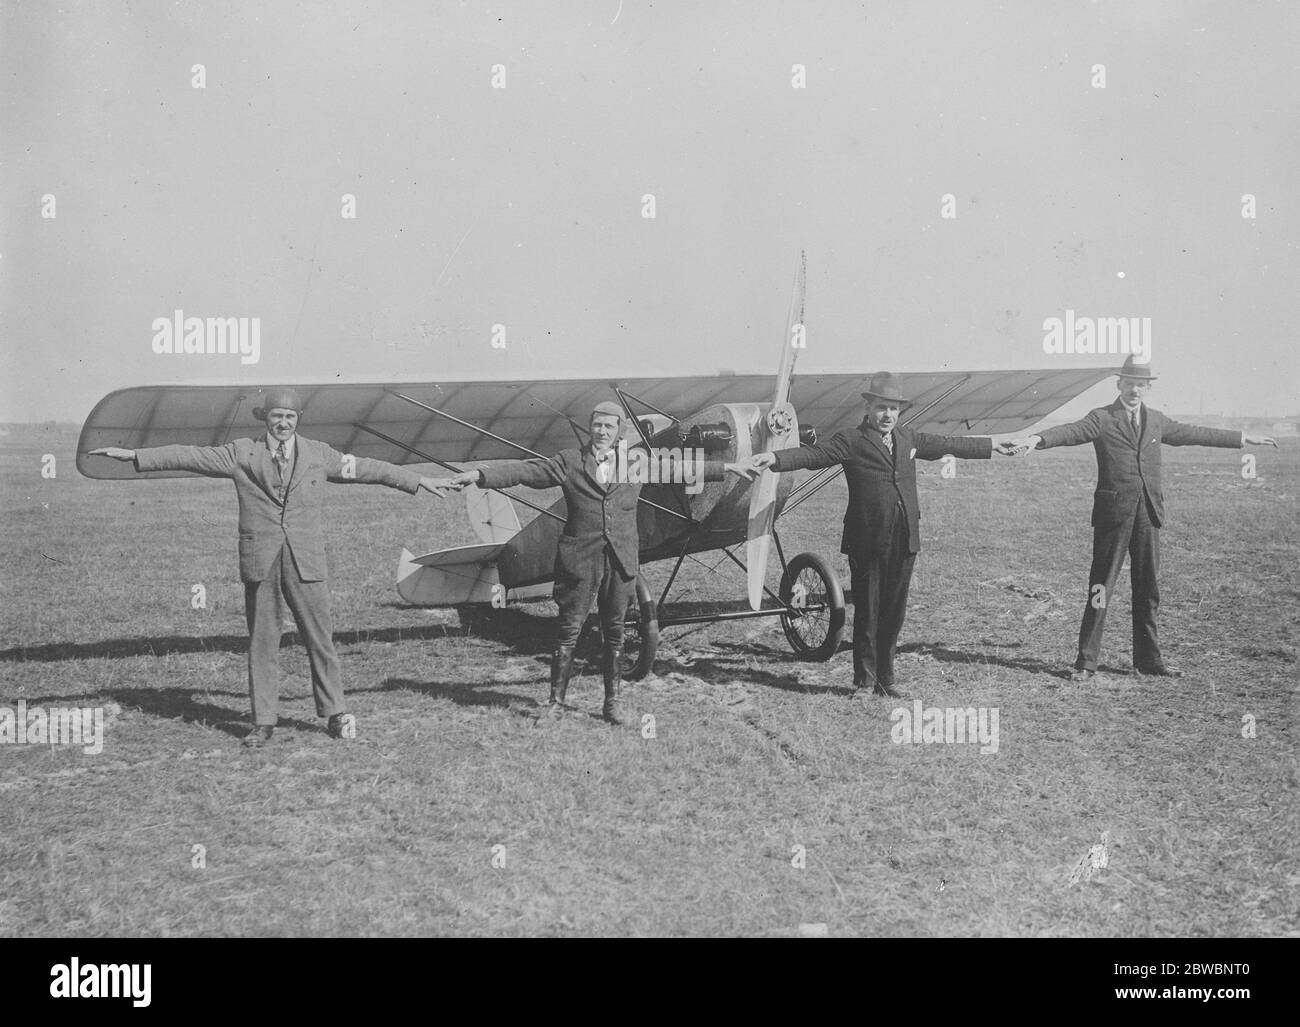 The sport plane The small sporting monoplane has been built by the brothers Rieseler Johannisthal . Its motor of two horizontal cylinders is air cooled and the whole machine weighs about 330 lbs . Its actual size is well shown in the photograph 8 April 1921 Stock Photo